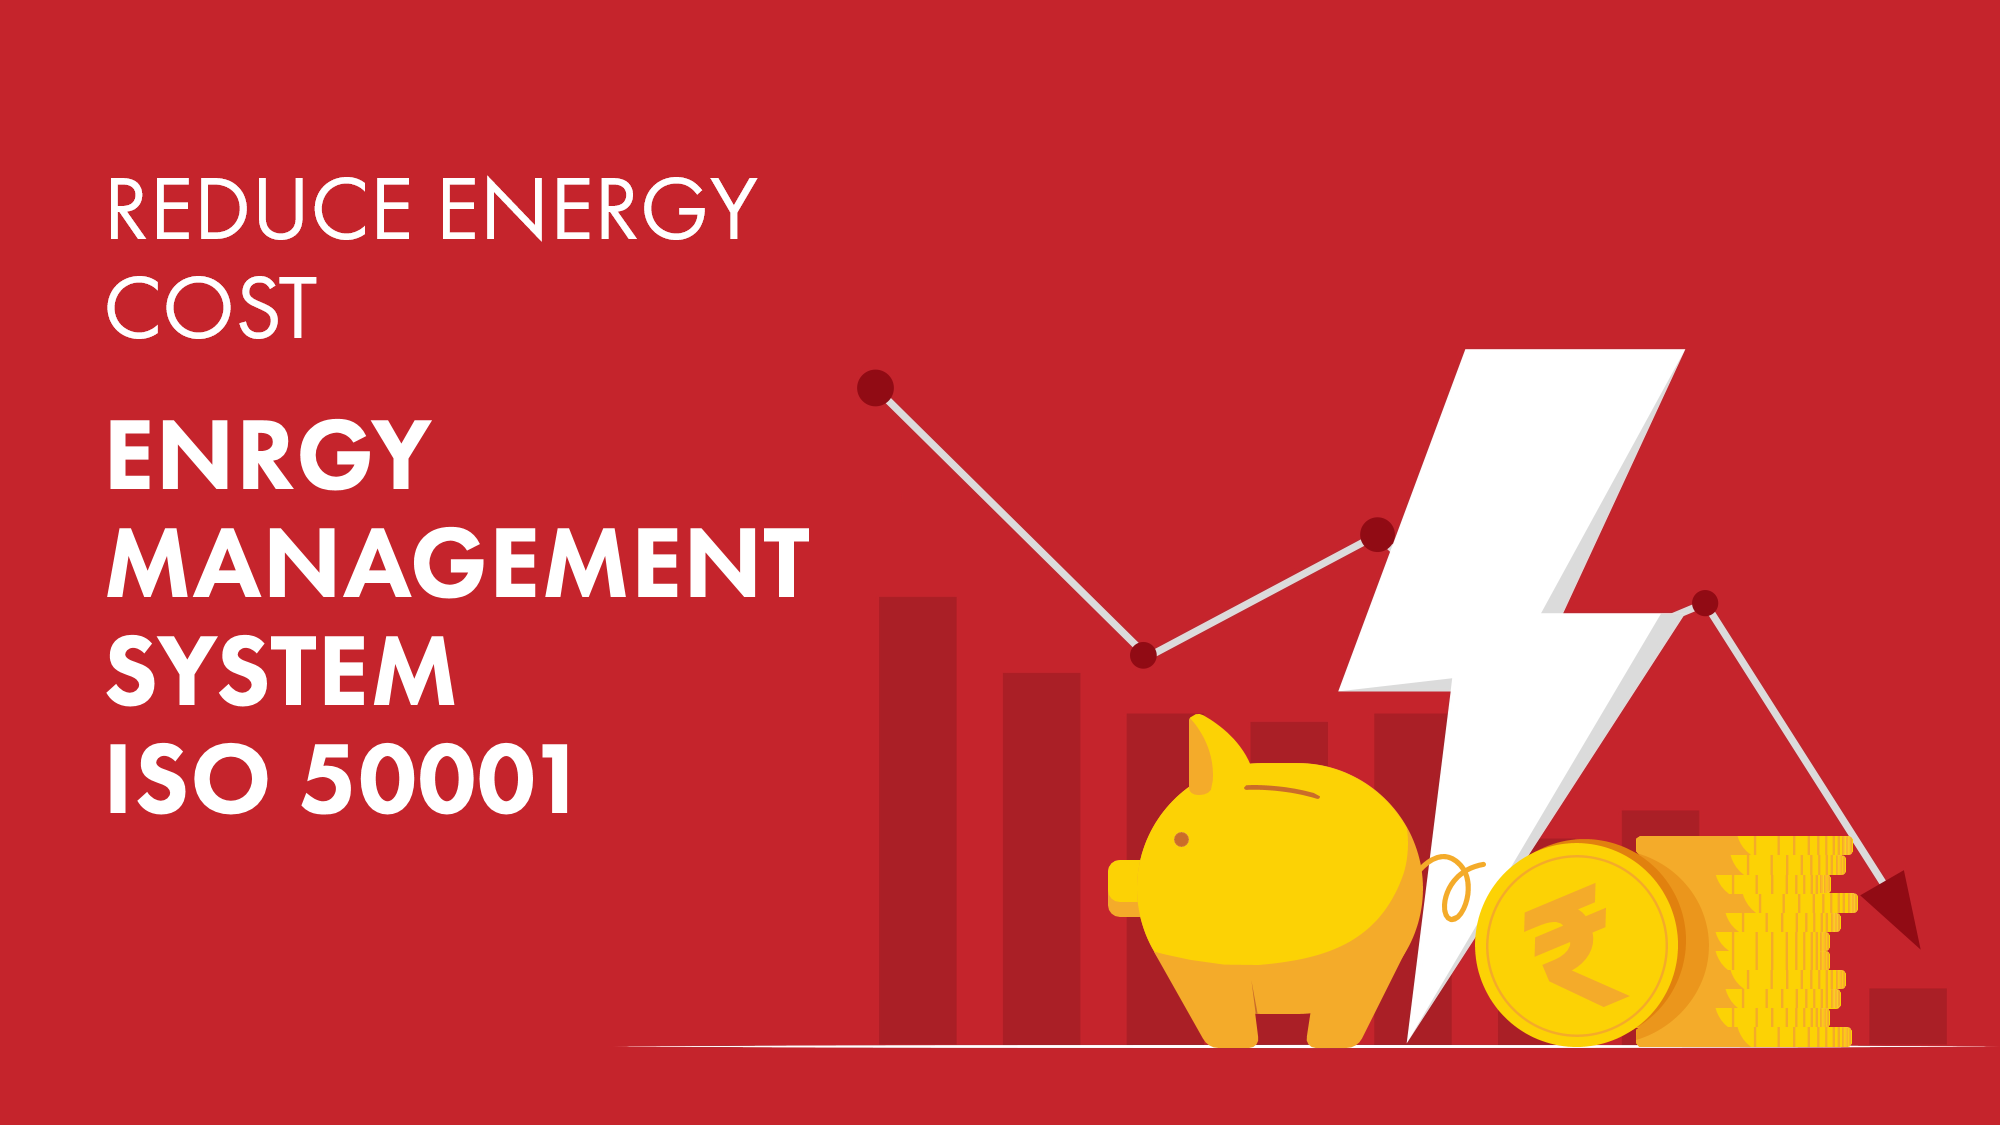 Reducing Energy cost with ISO 50001: Energy Management System